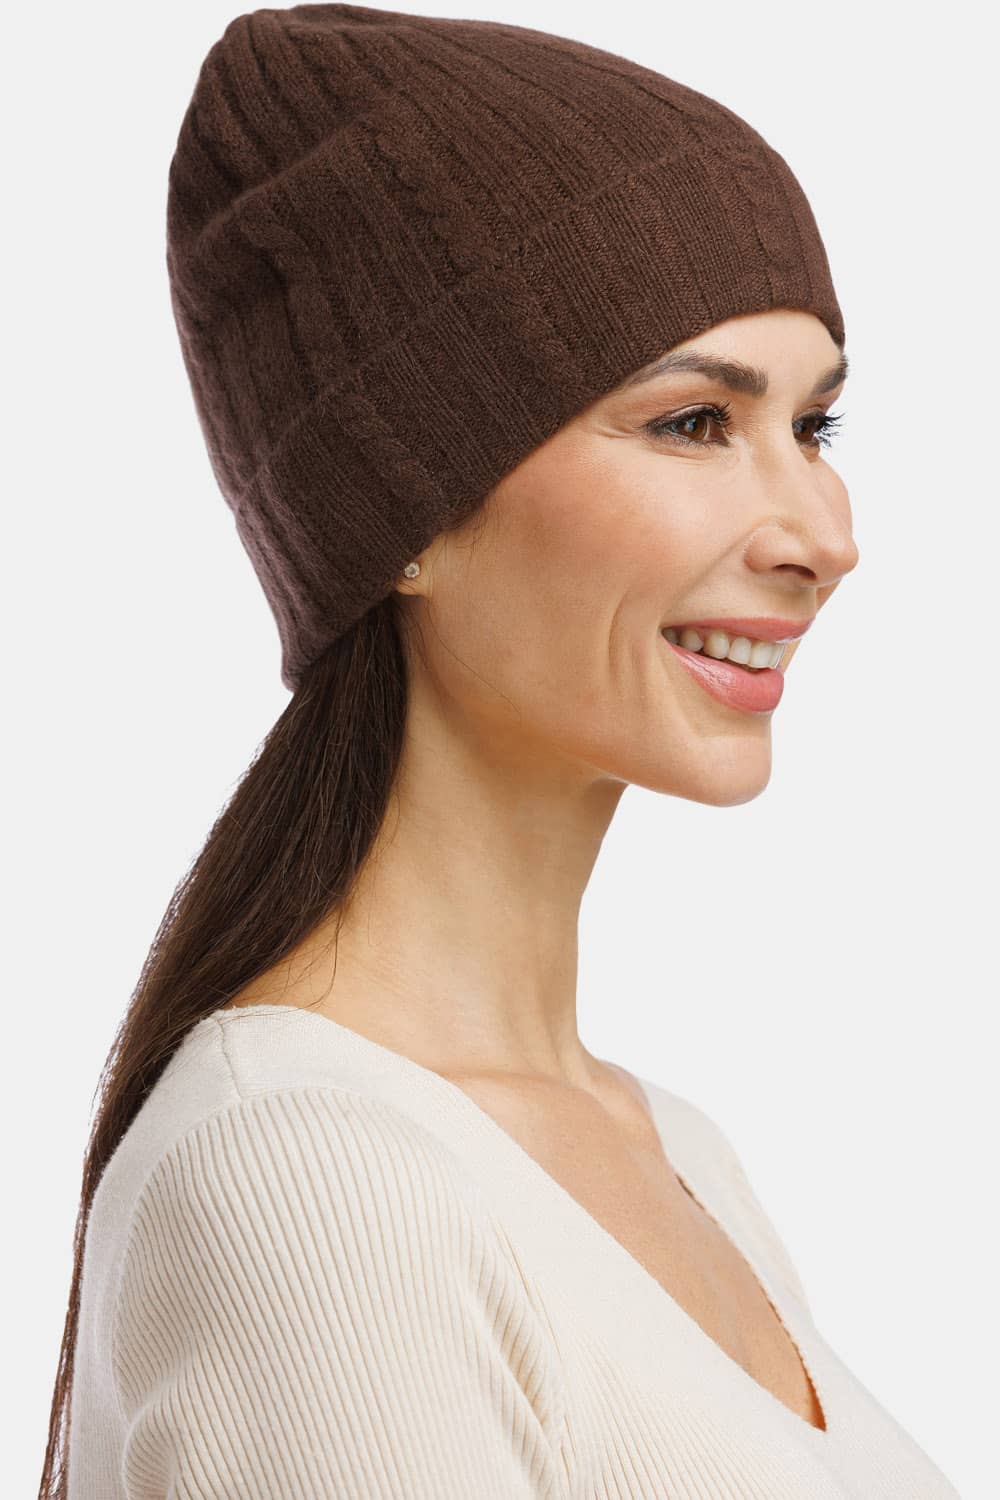 Cashmere Cable Knit Hat with Turn Up – The Andover Shop